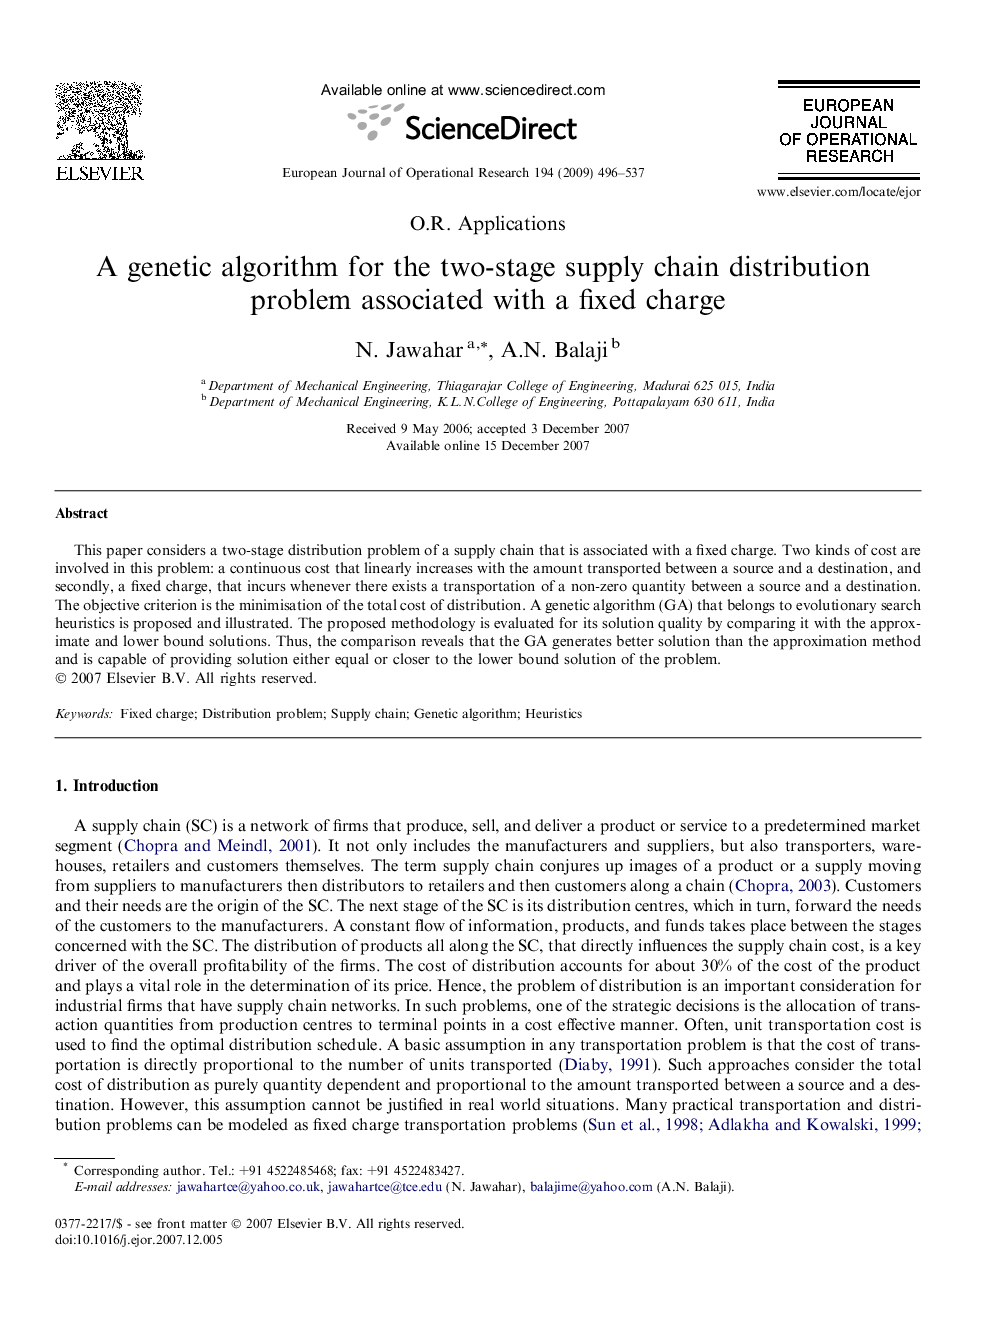 A genetic algorithm for the two-stage supply chain distribution problem associated with a fixed charge